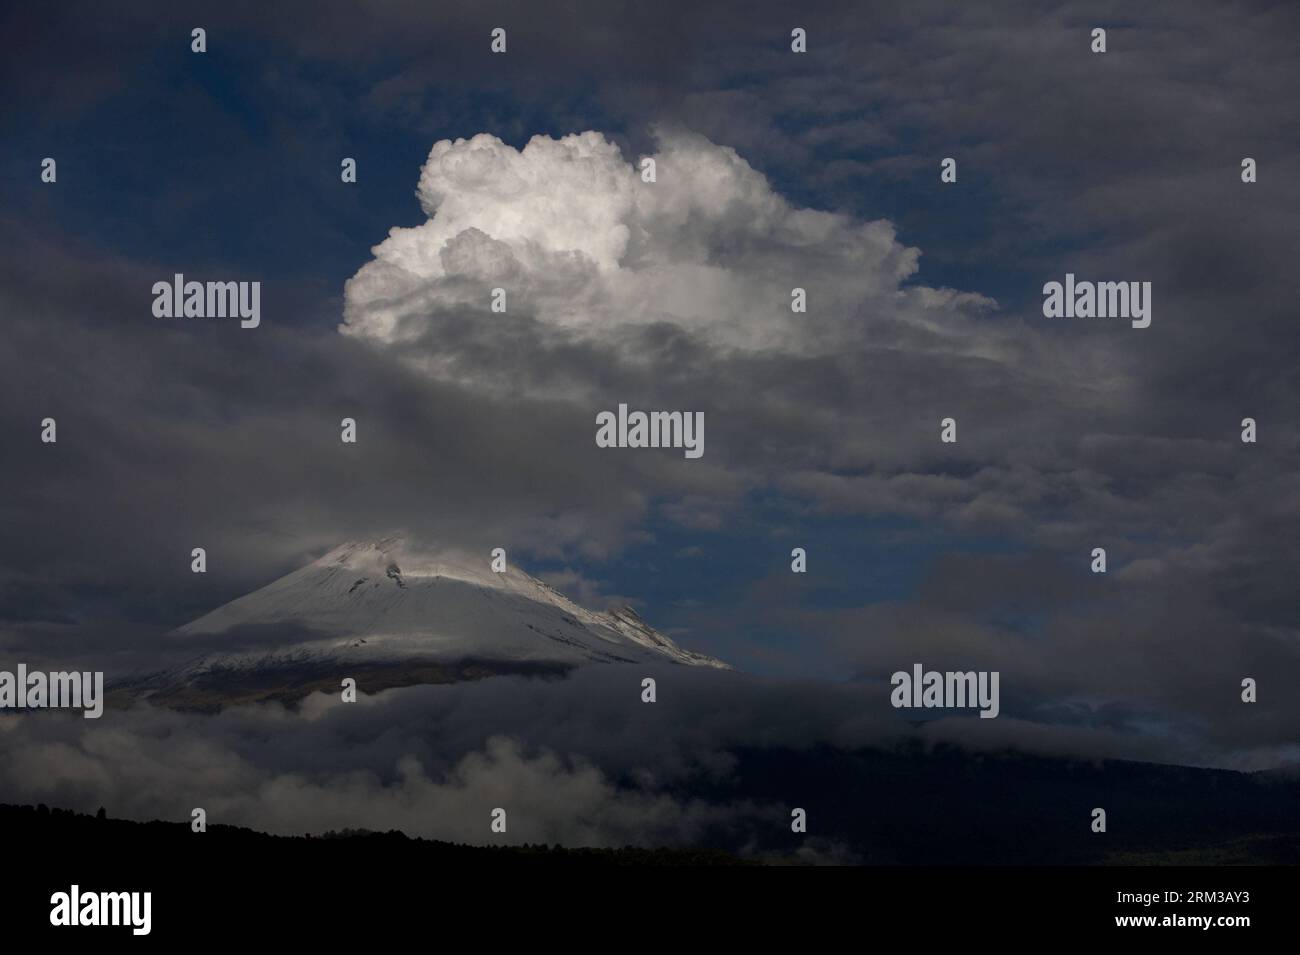 Bildnummer: 60122060  Datum: 13.07.2013  Copyright: imago/Xinhua (130713) -- PUEBLA, July 13, 2013 (Xinhua) -- The Popocatepetl Volcano is seen in Santiago Xalitzintla locality, in San Nicolas de los Ranchos municipality, state of Puebla, central Mexico, on July 13, 2013. According to Mexican authorities, during the last 24 hours the Popocatepetl Volcano registered 38 exhalations, some ash emissions and high frequency and low amplitude tremors. (Xinhua/Guillermo Arias) MEXICO-PUEBLA-ENVIRONMENT-VOLCANO PUBLICATIONxNOTxINxCHN Gesellschaft Vulkan Rauch Asche xas x0x 2013 quer premiumd      60122 Stock Photo